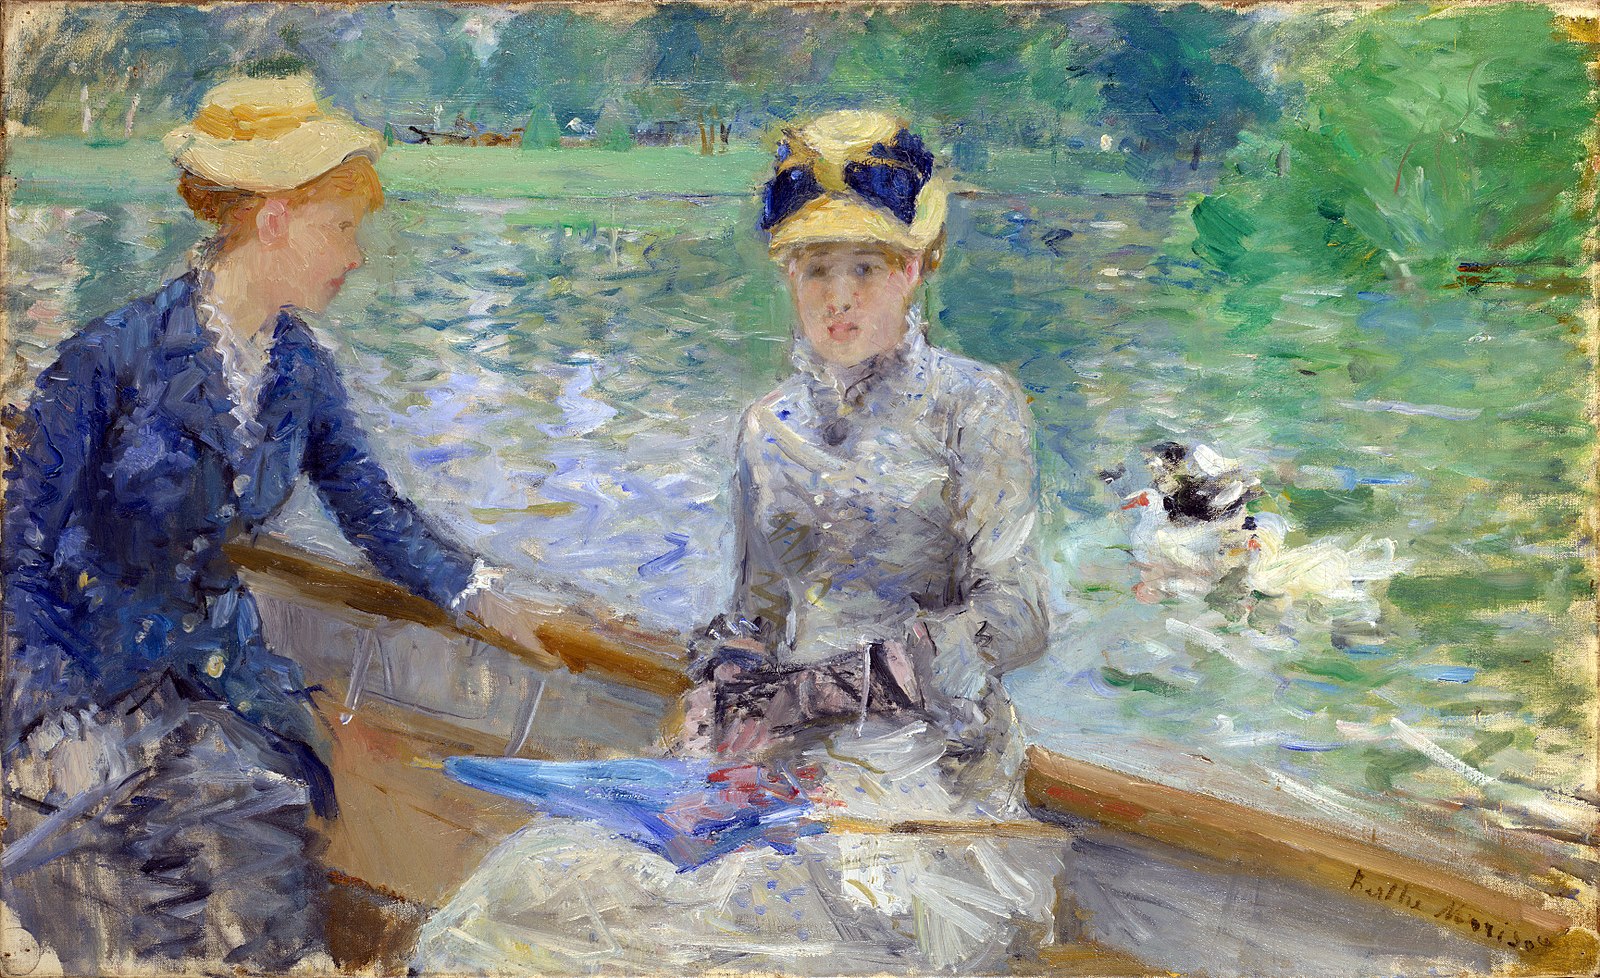 Two woman in dresses sitting in a rowboat on a lake